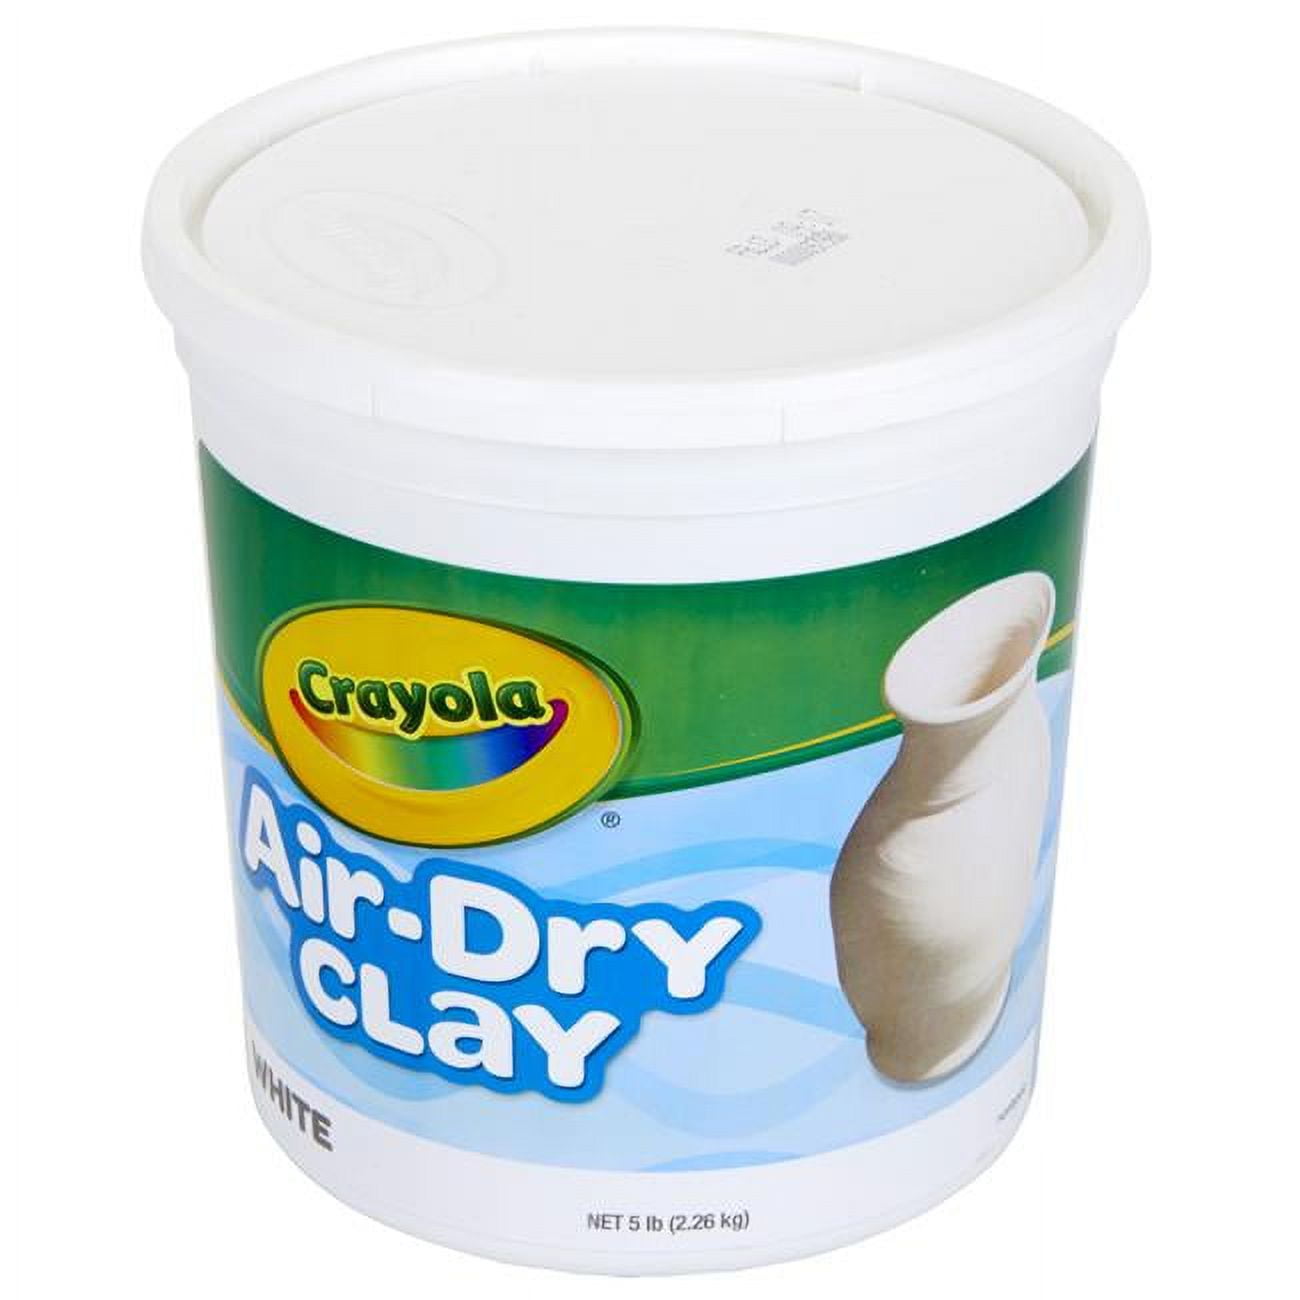 Crayola Air Dry Clay Bucket, No Bake Clay for Kids, 5Lbs, White 